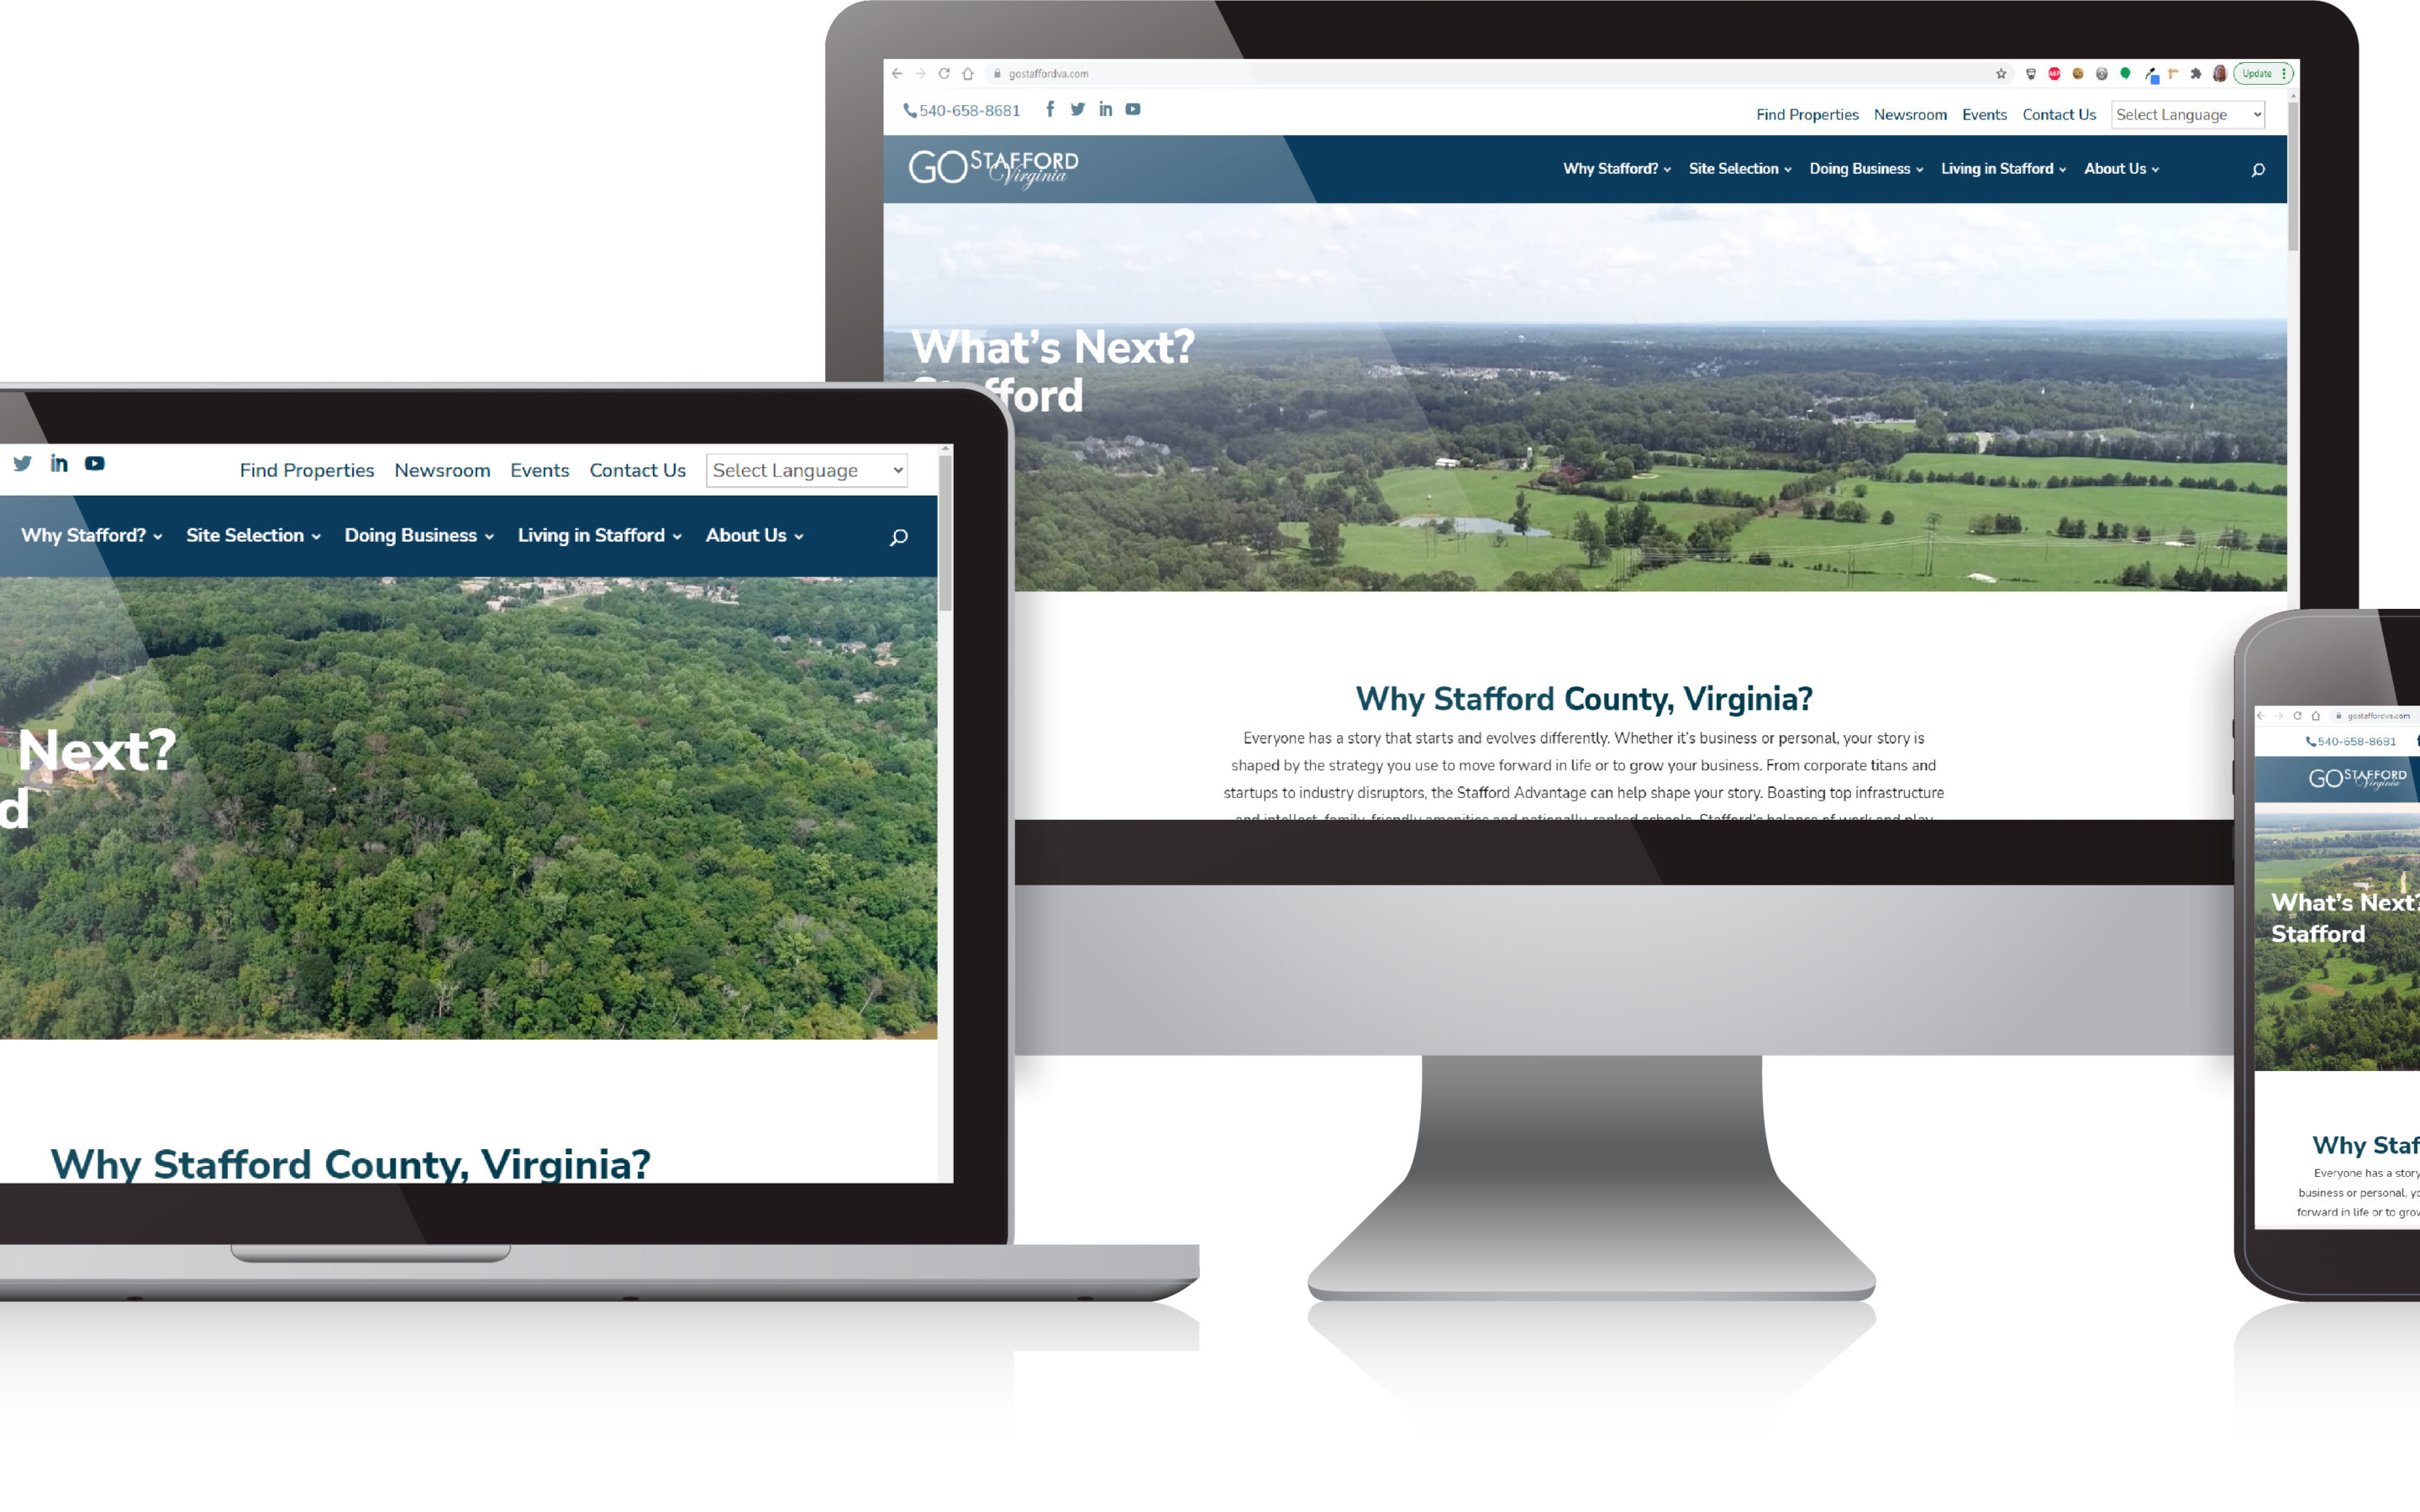 Stafford’s Economic Development Department Successfully Launches New Website